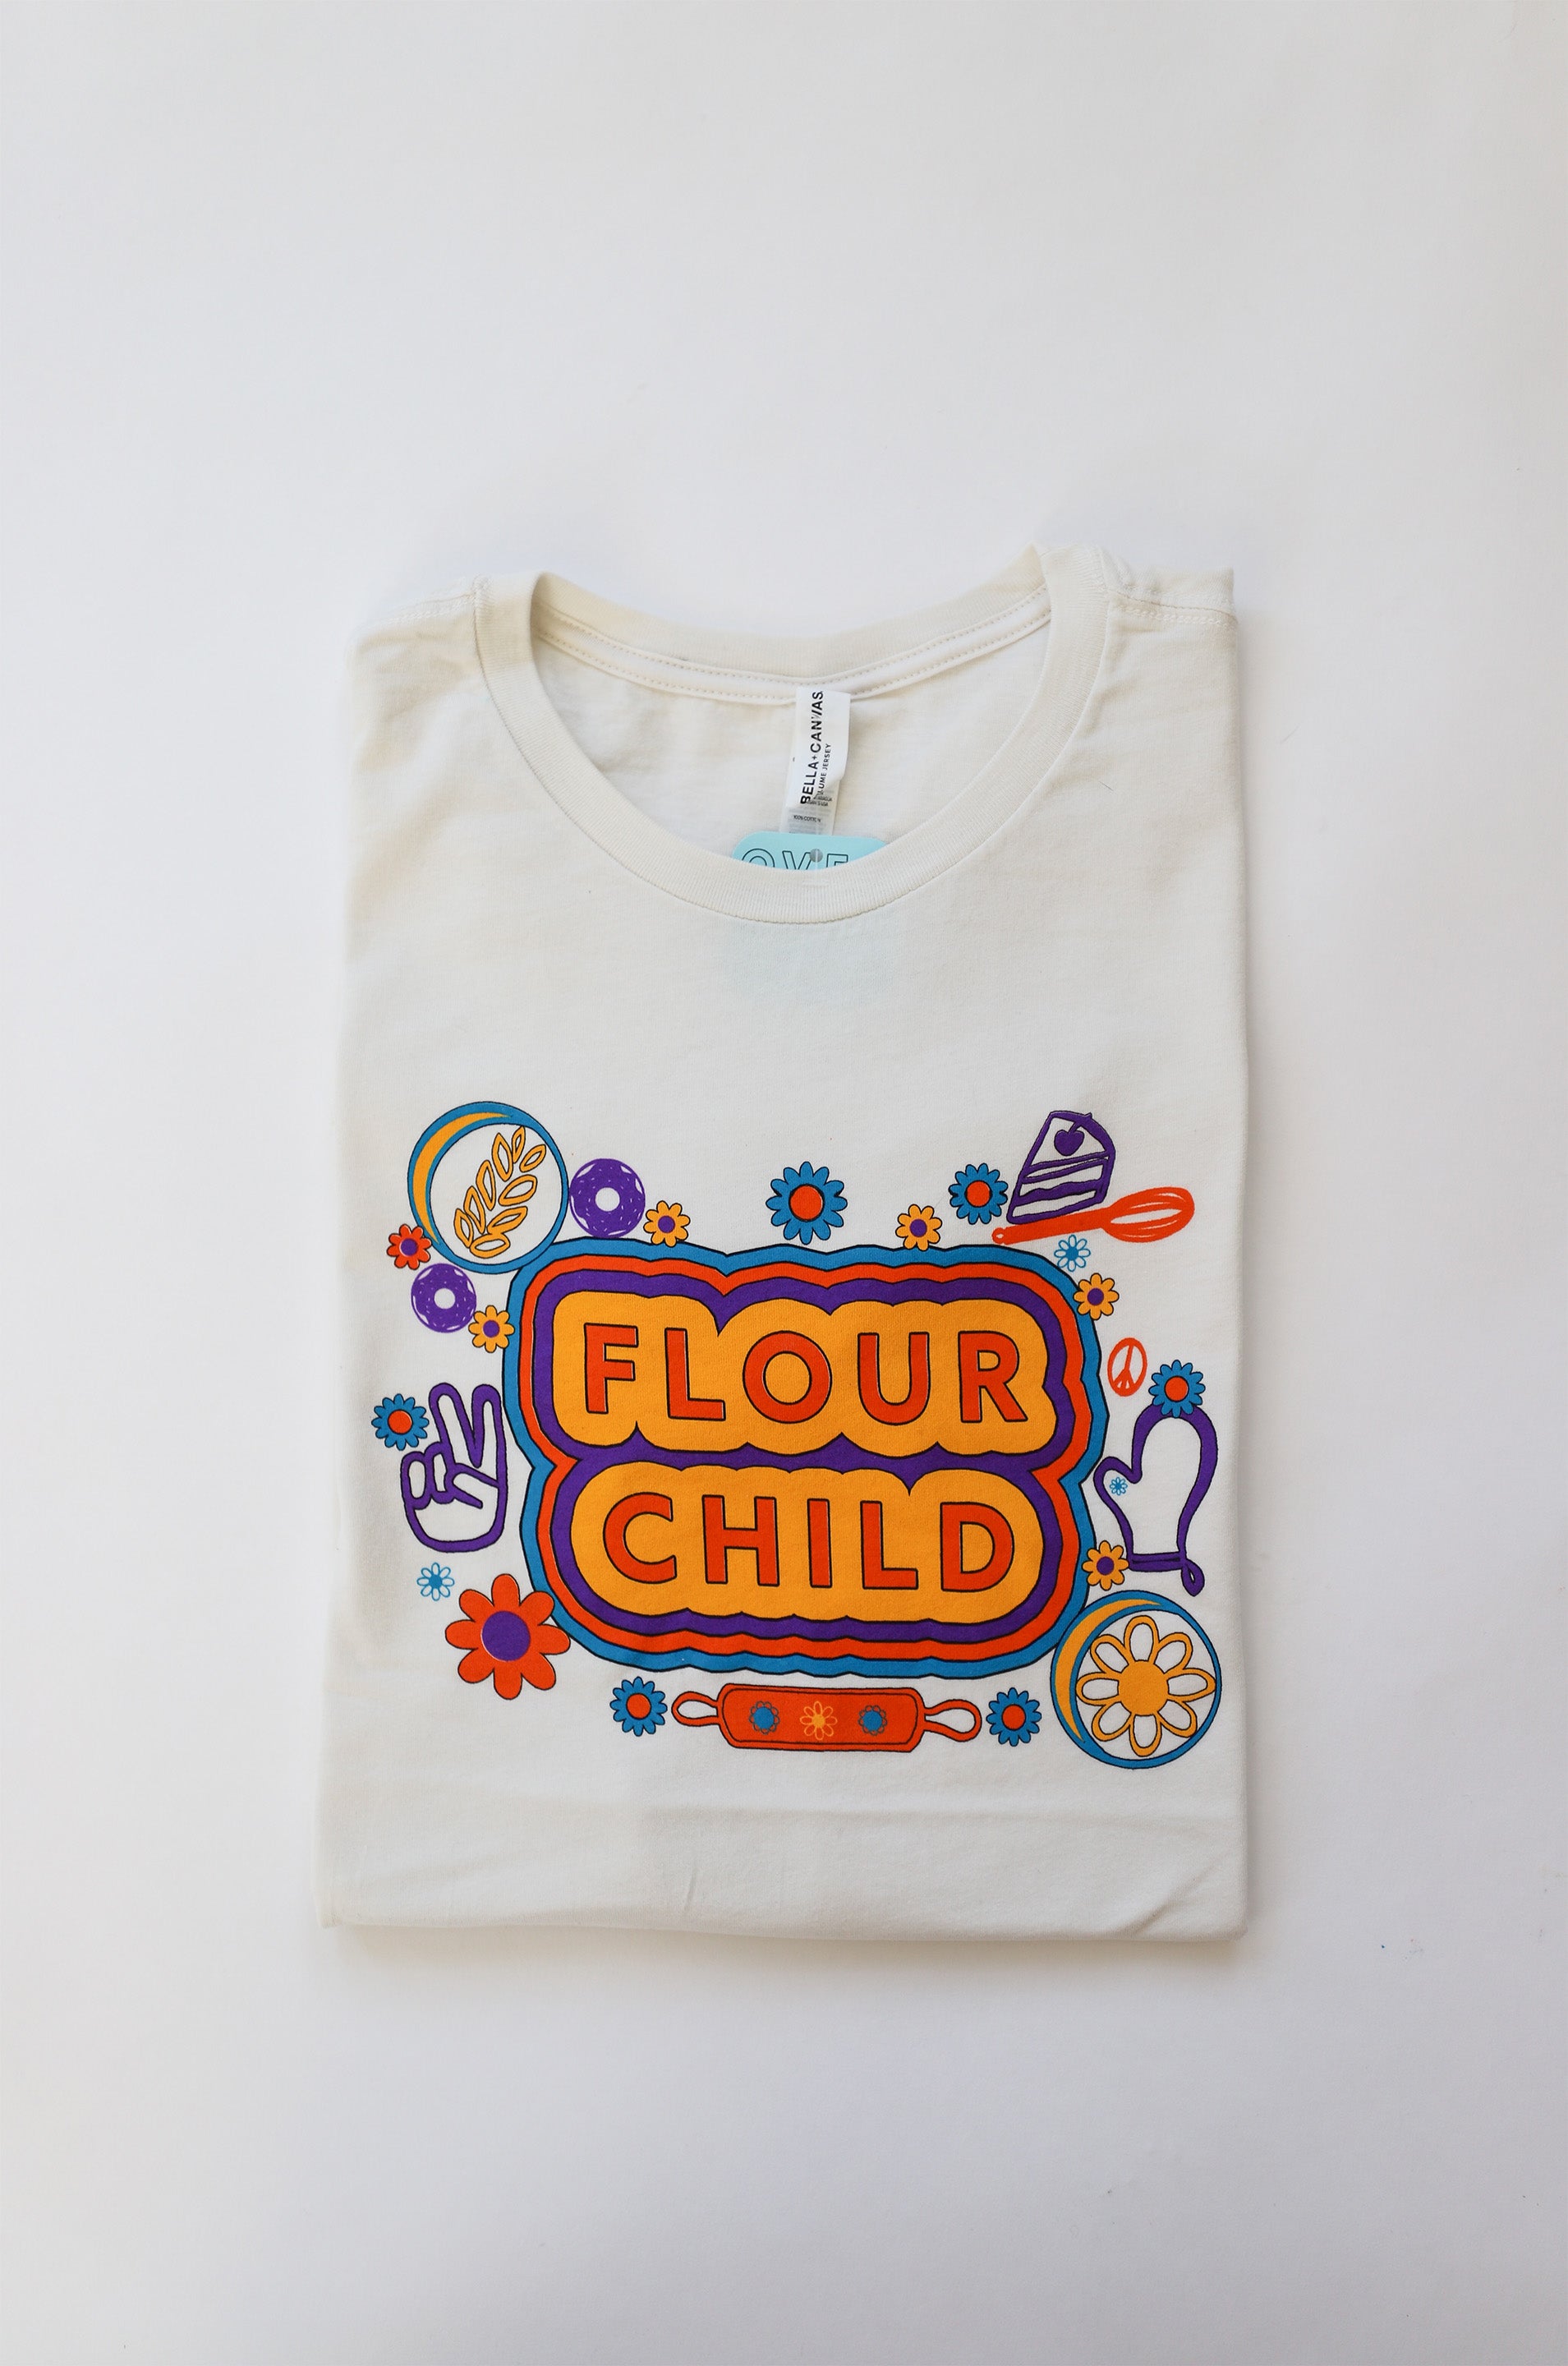 A folded white tee with the words Flour Child and yellow, orange, blue and purple illustrations